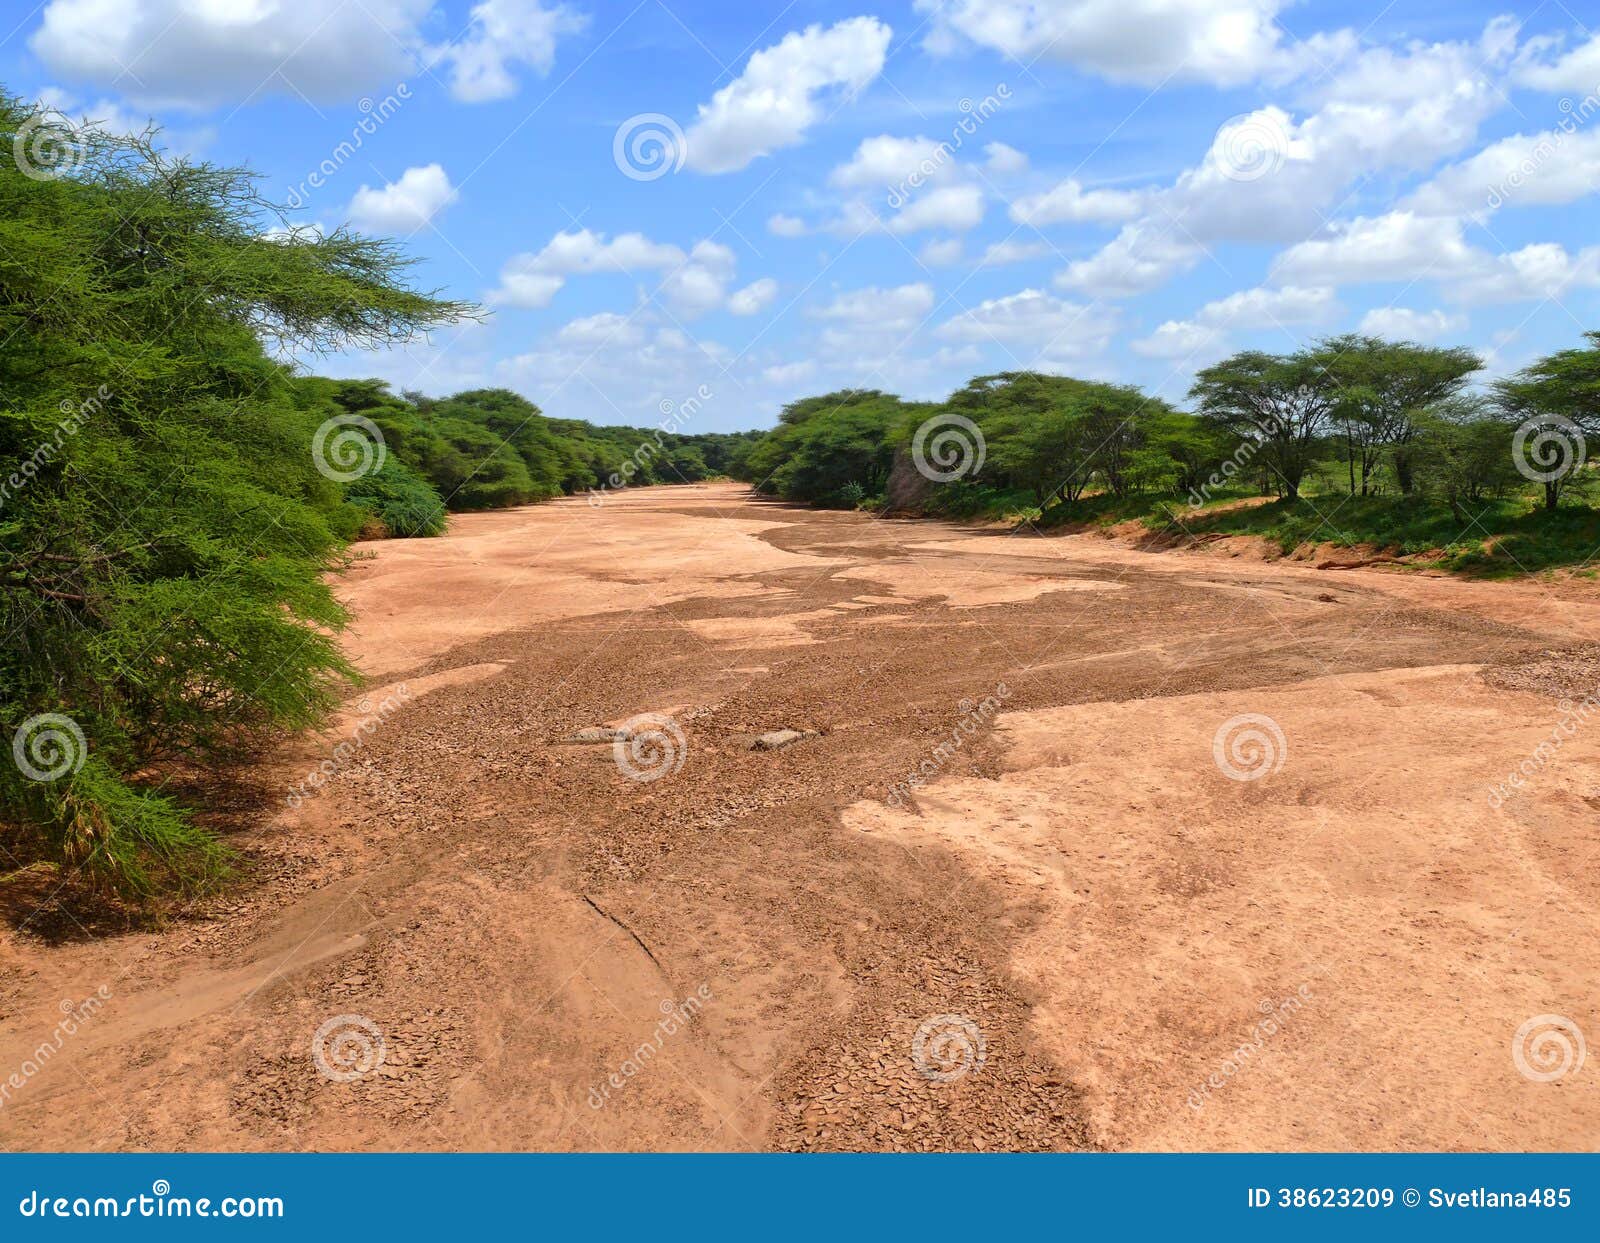 Africa, Kenya. Dry Riverbed. Landscape Nature. Stock - Image of country, plants: 38623209